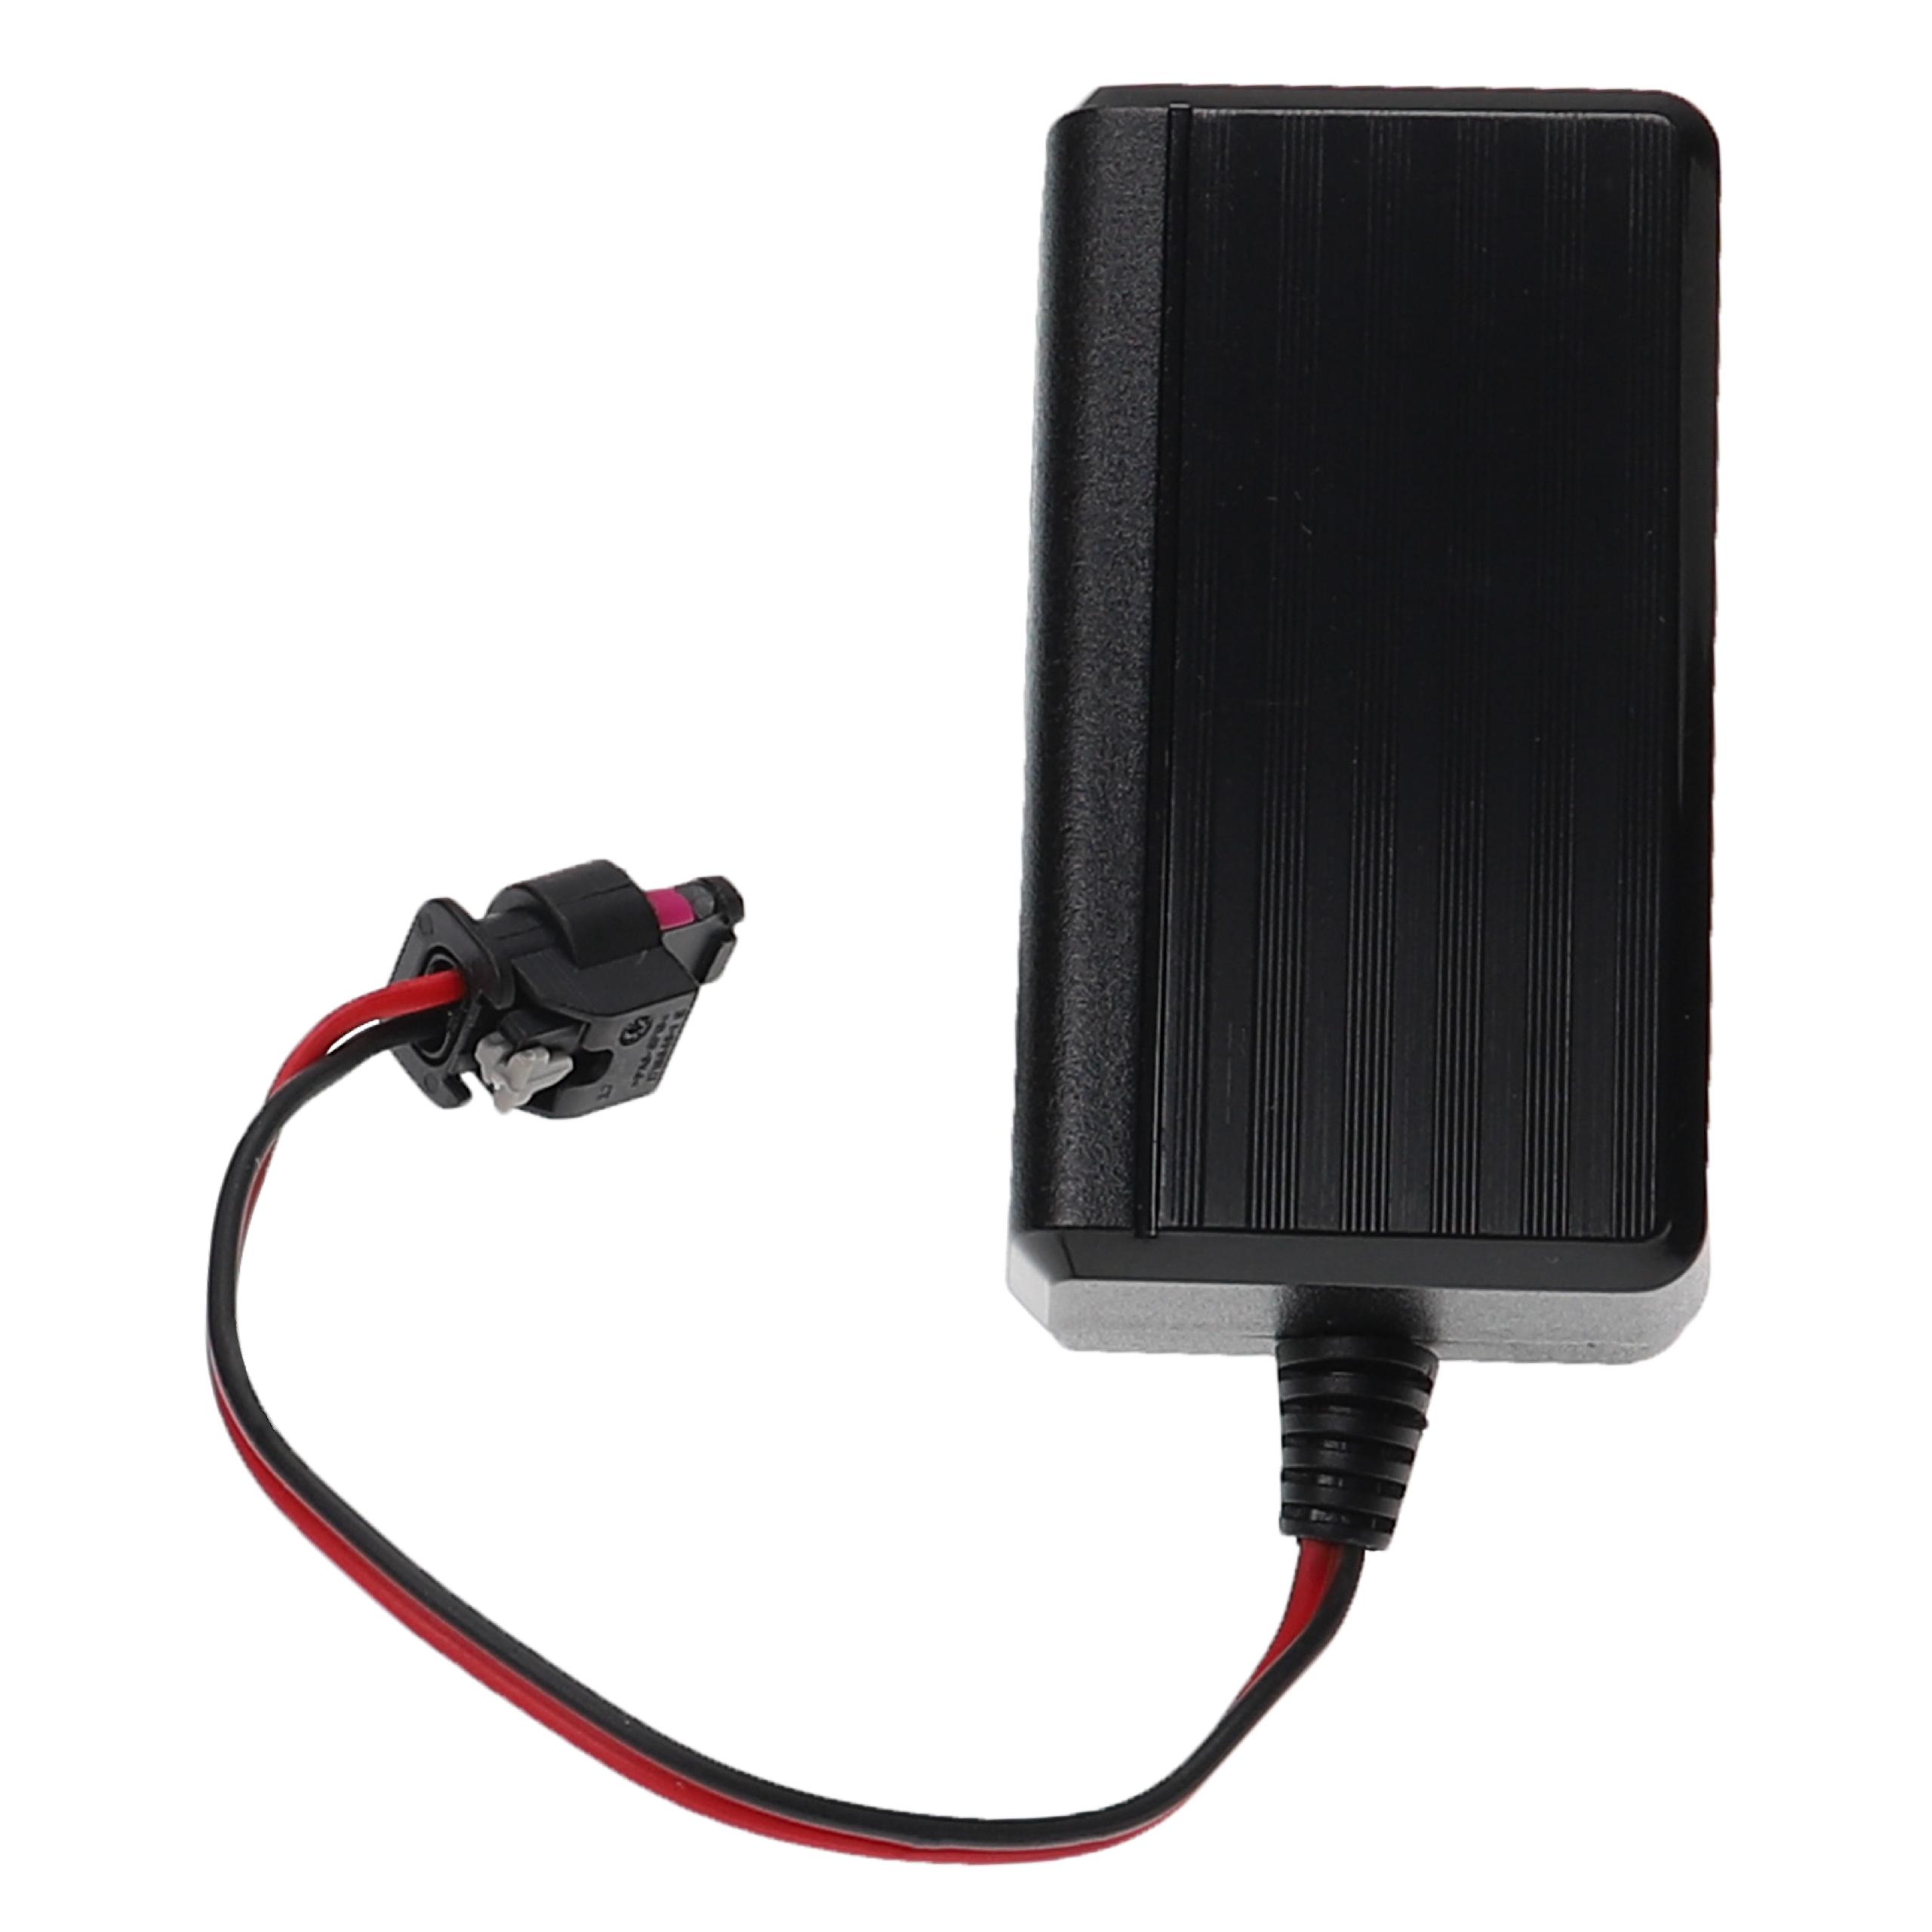 Mains Power Adapter replaces Husqvarna 581145101 for Husqvarna Robot Lawn Mower Charging Station etc.